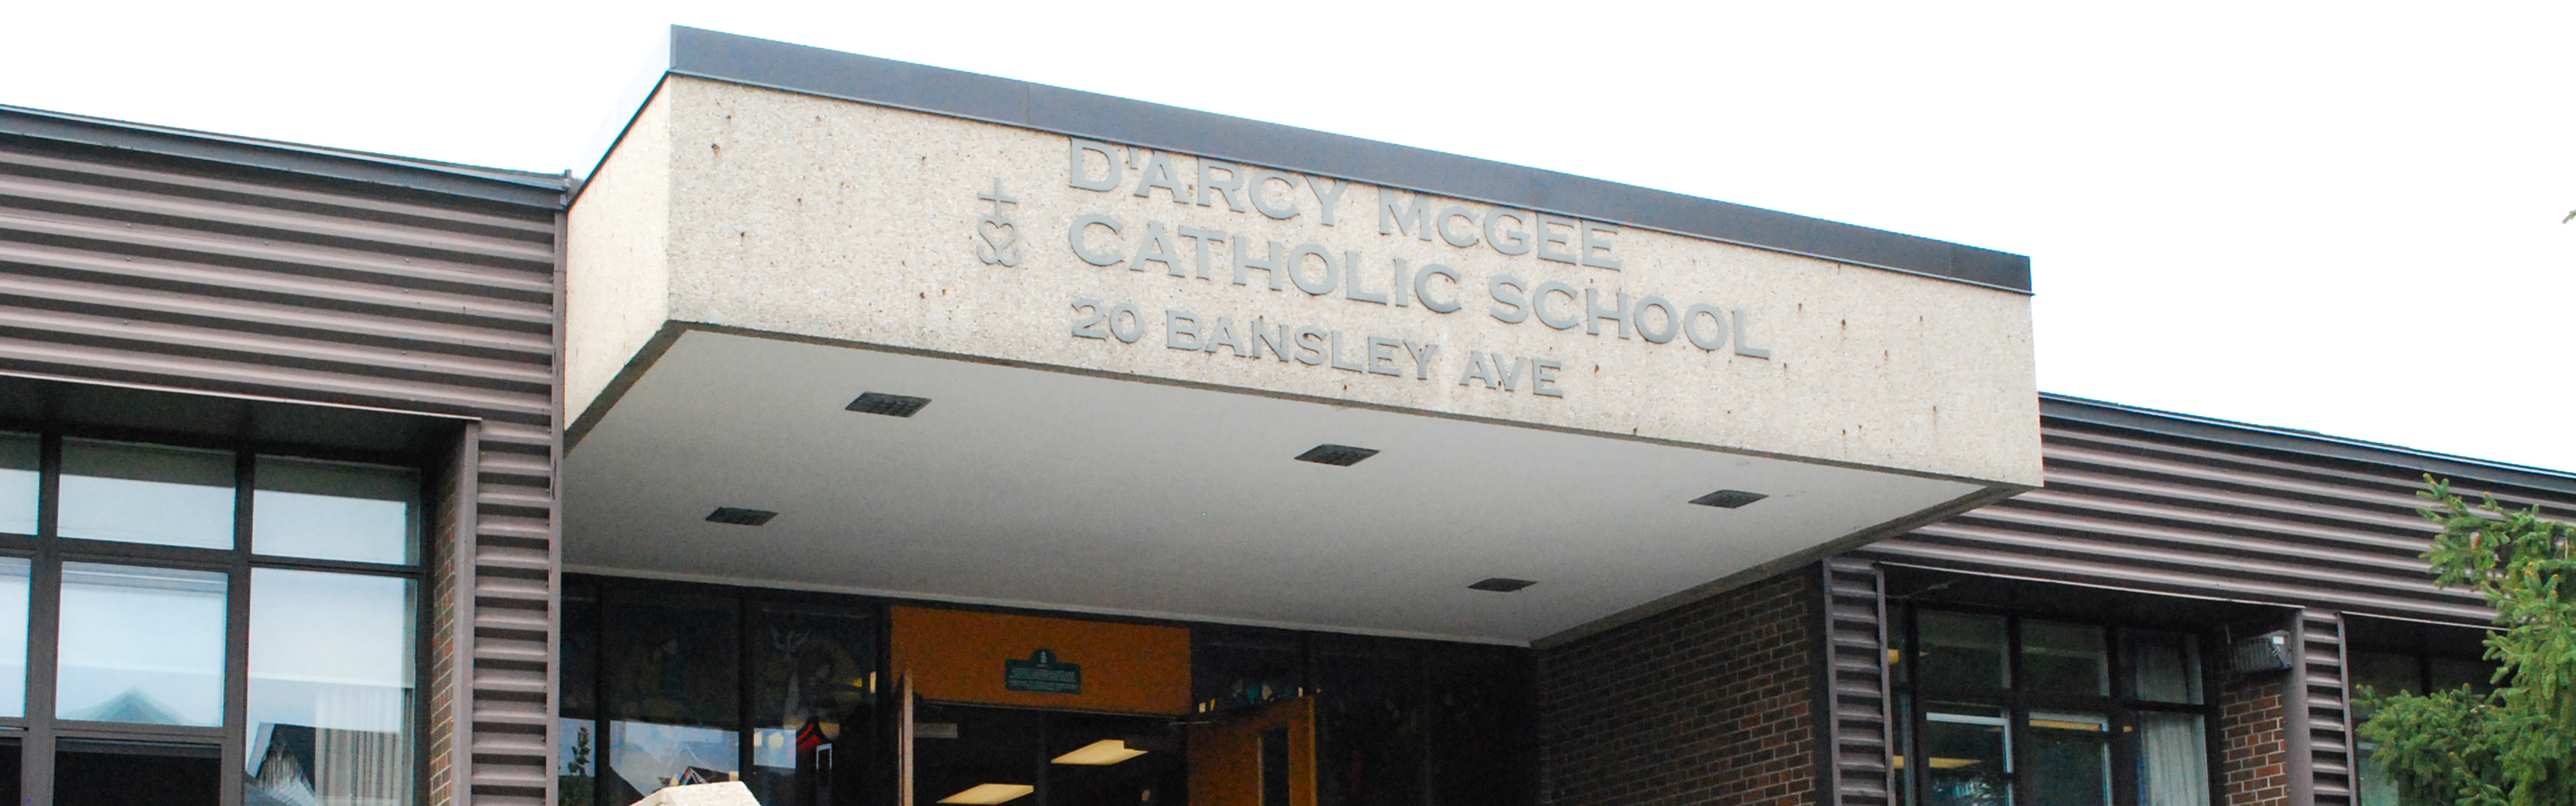 Front of the D'Arcy McGee Catholic School building